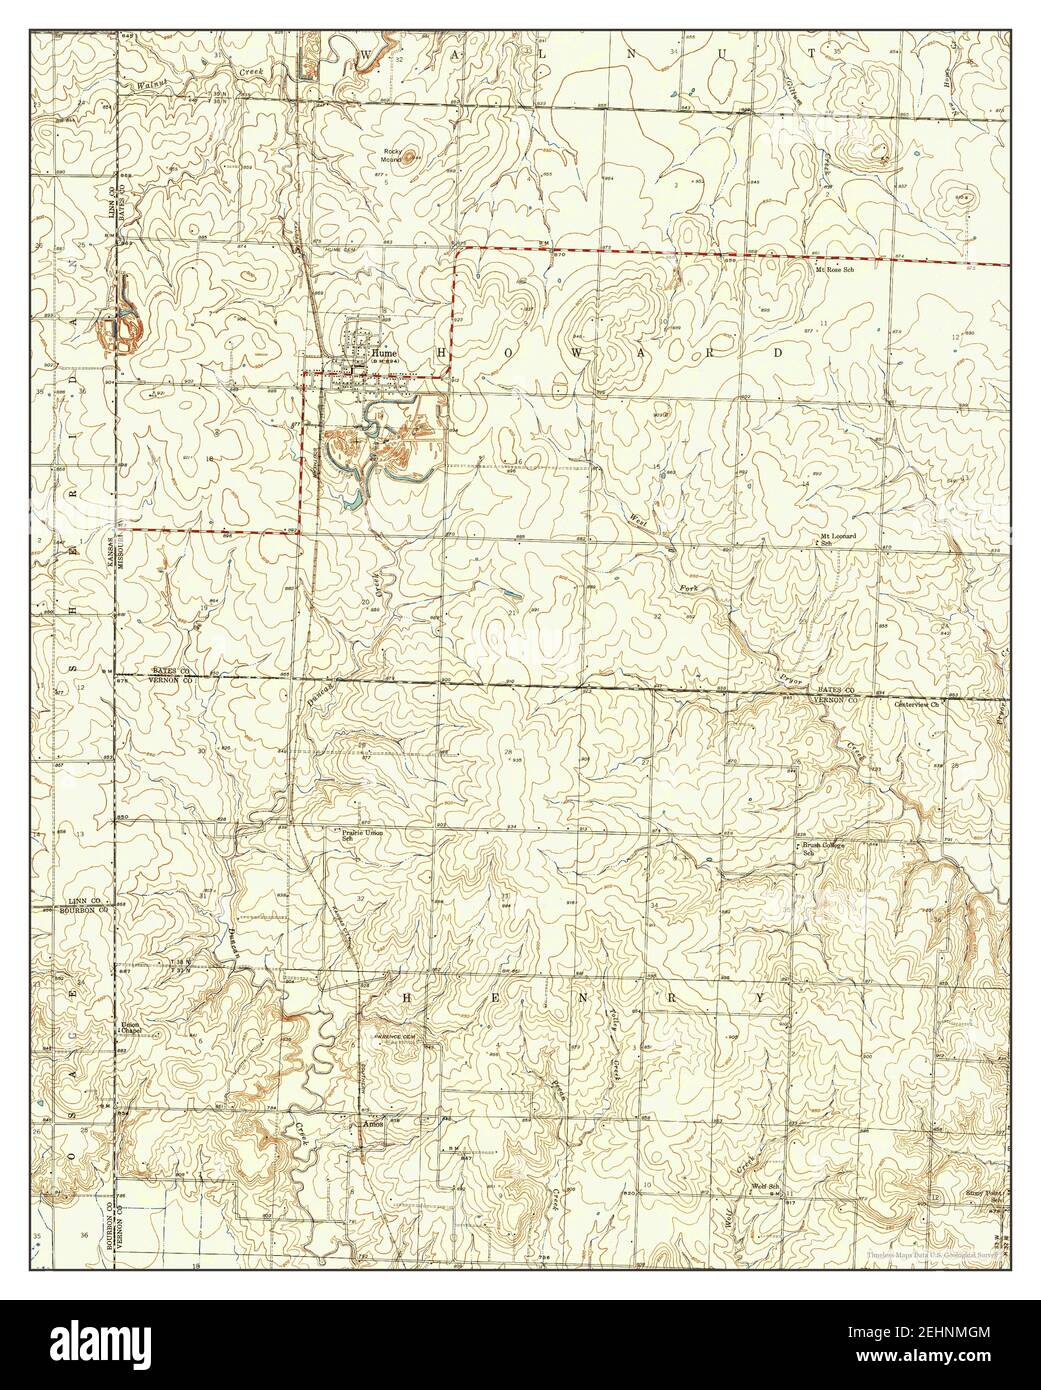 Hume, Missouri, map 1940, 1:24000, United States of America by Timeless Maps, data U.S. Geological Survey Stock Photo